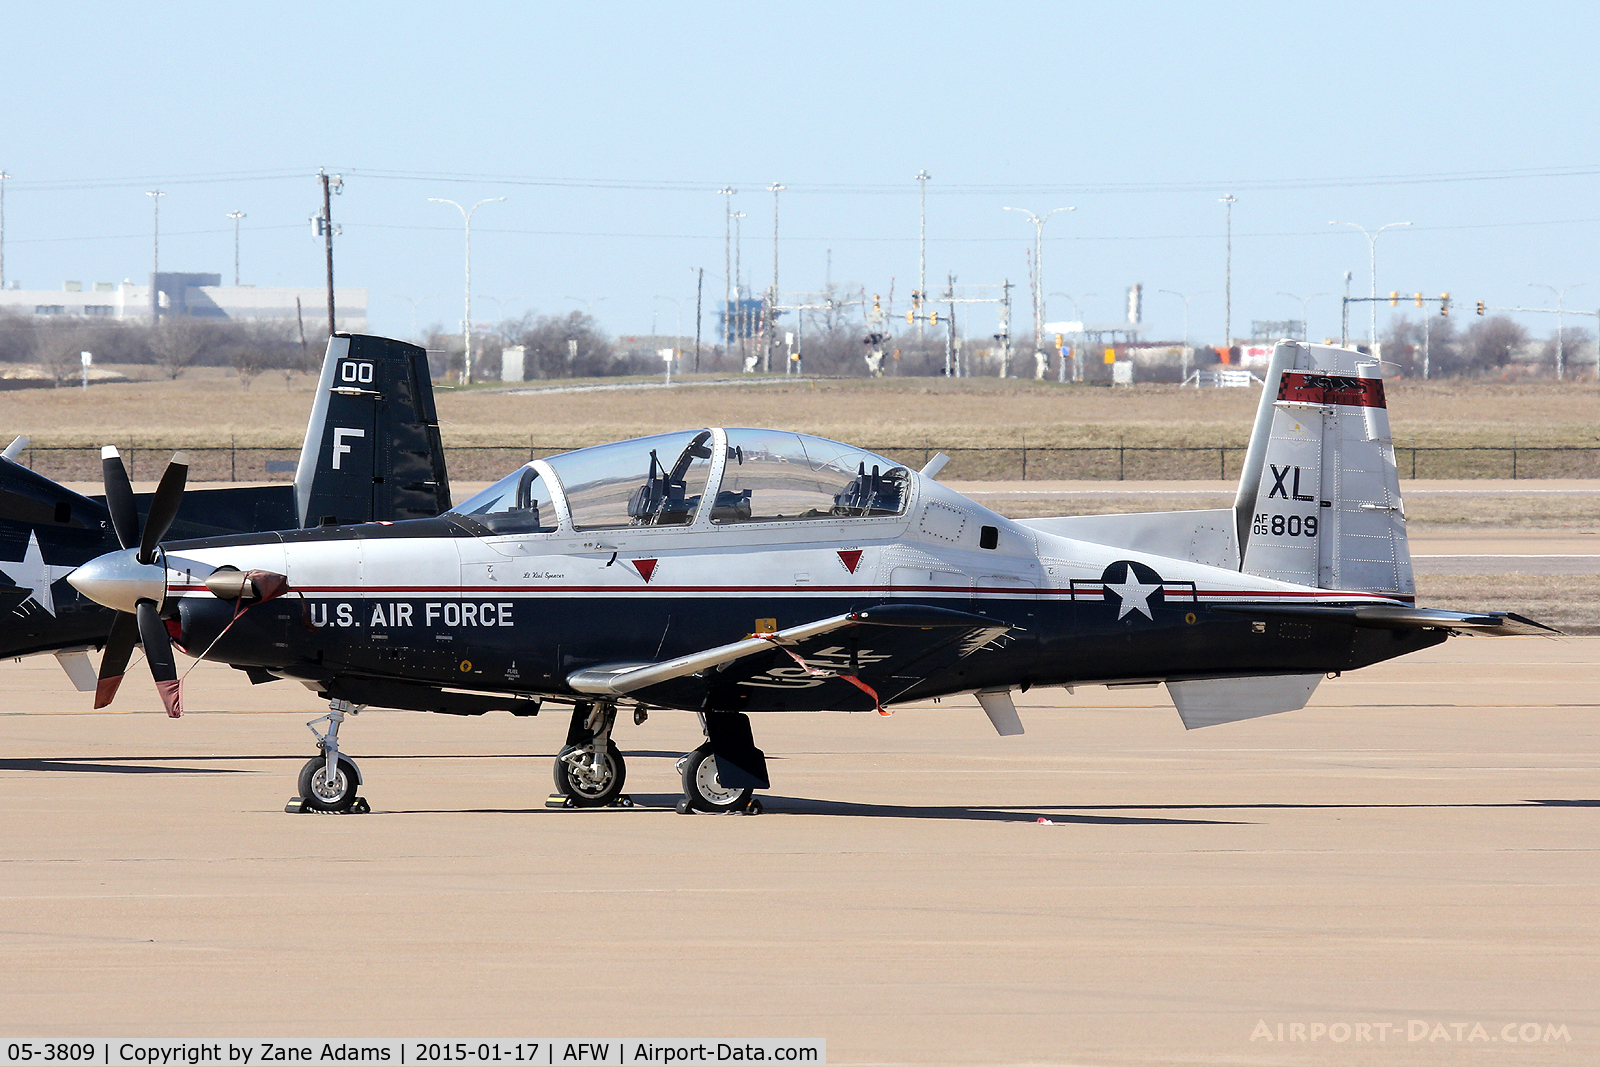 05-3809, 2005 Raytheon T-6A Texan II C/N PT-363, USAF T-6A on the ramp at Alliance Airport - Ft. Worth, TX